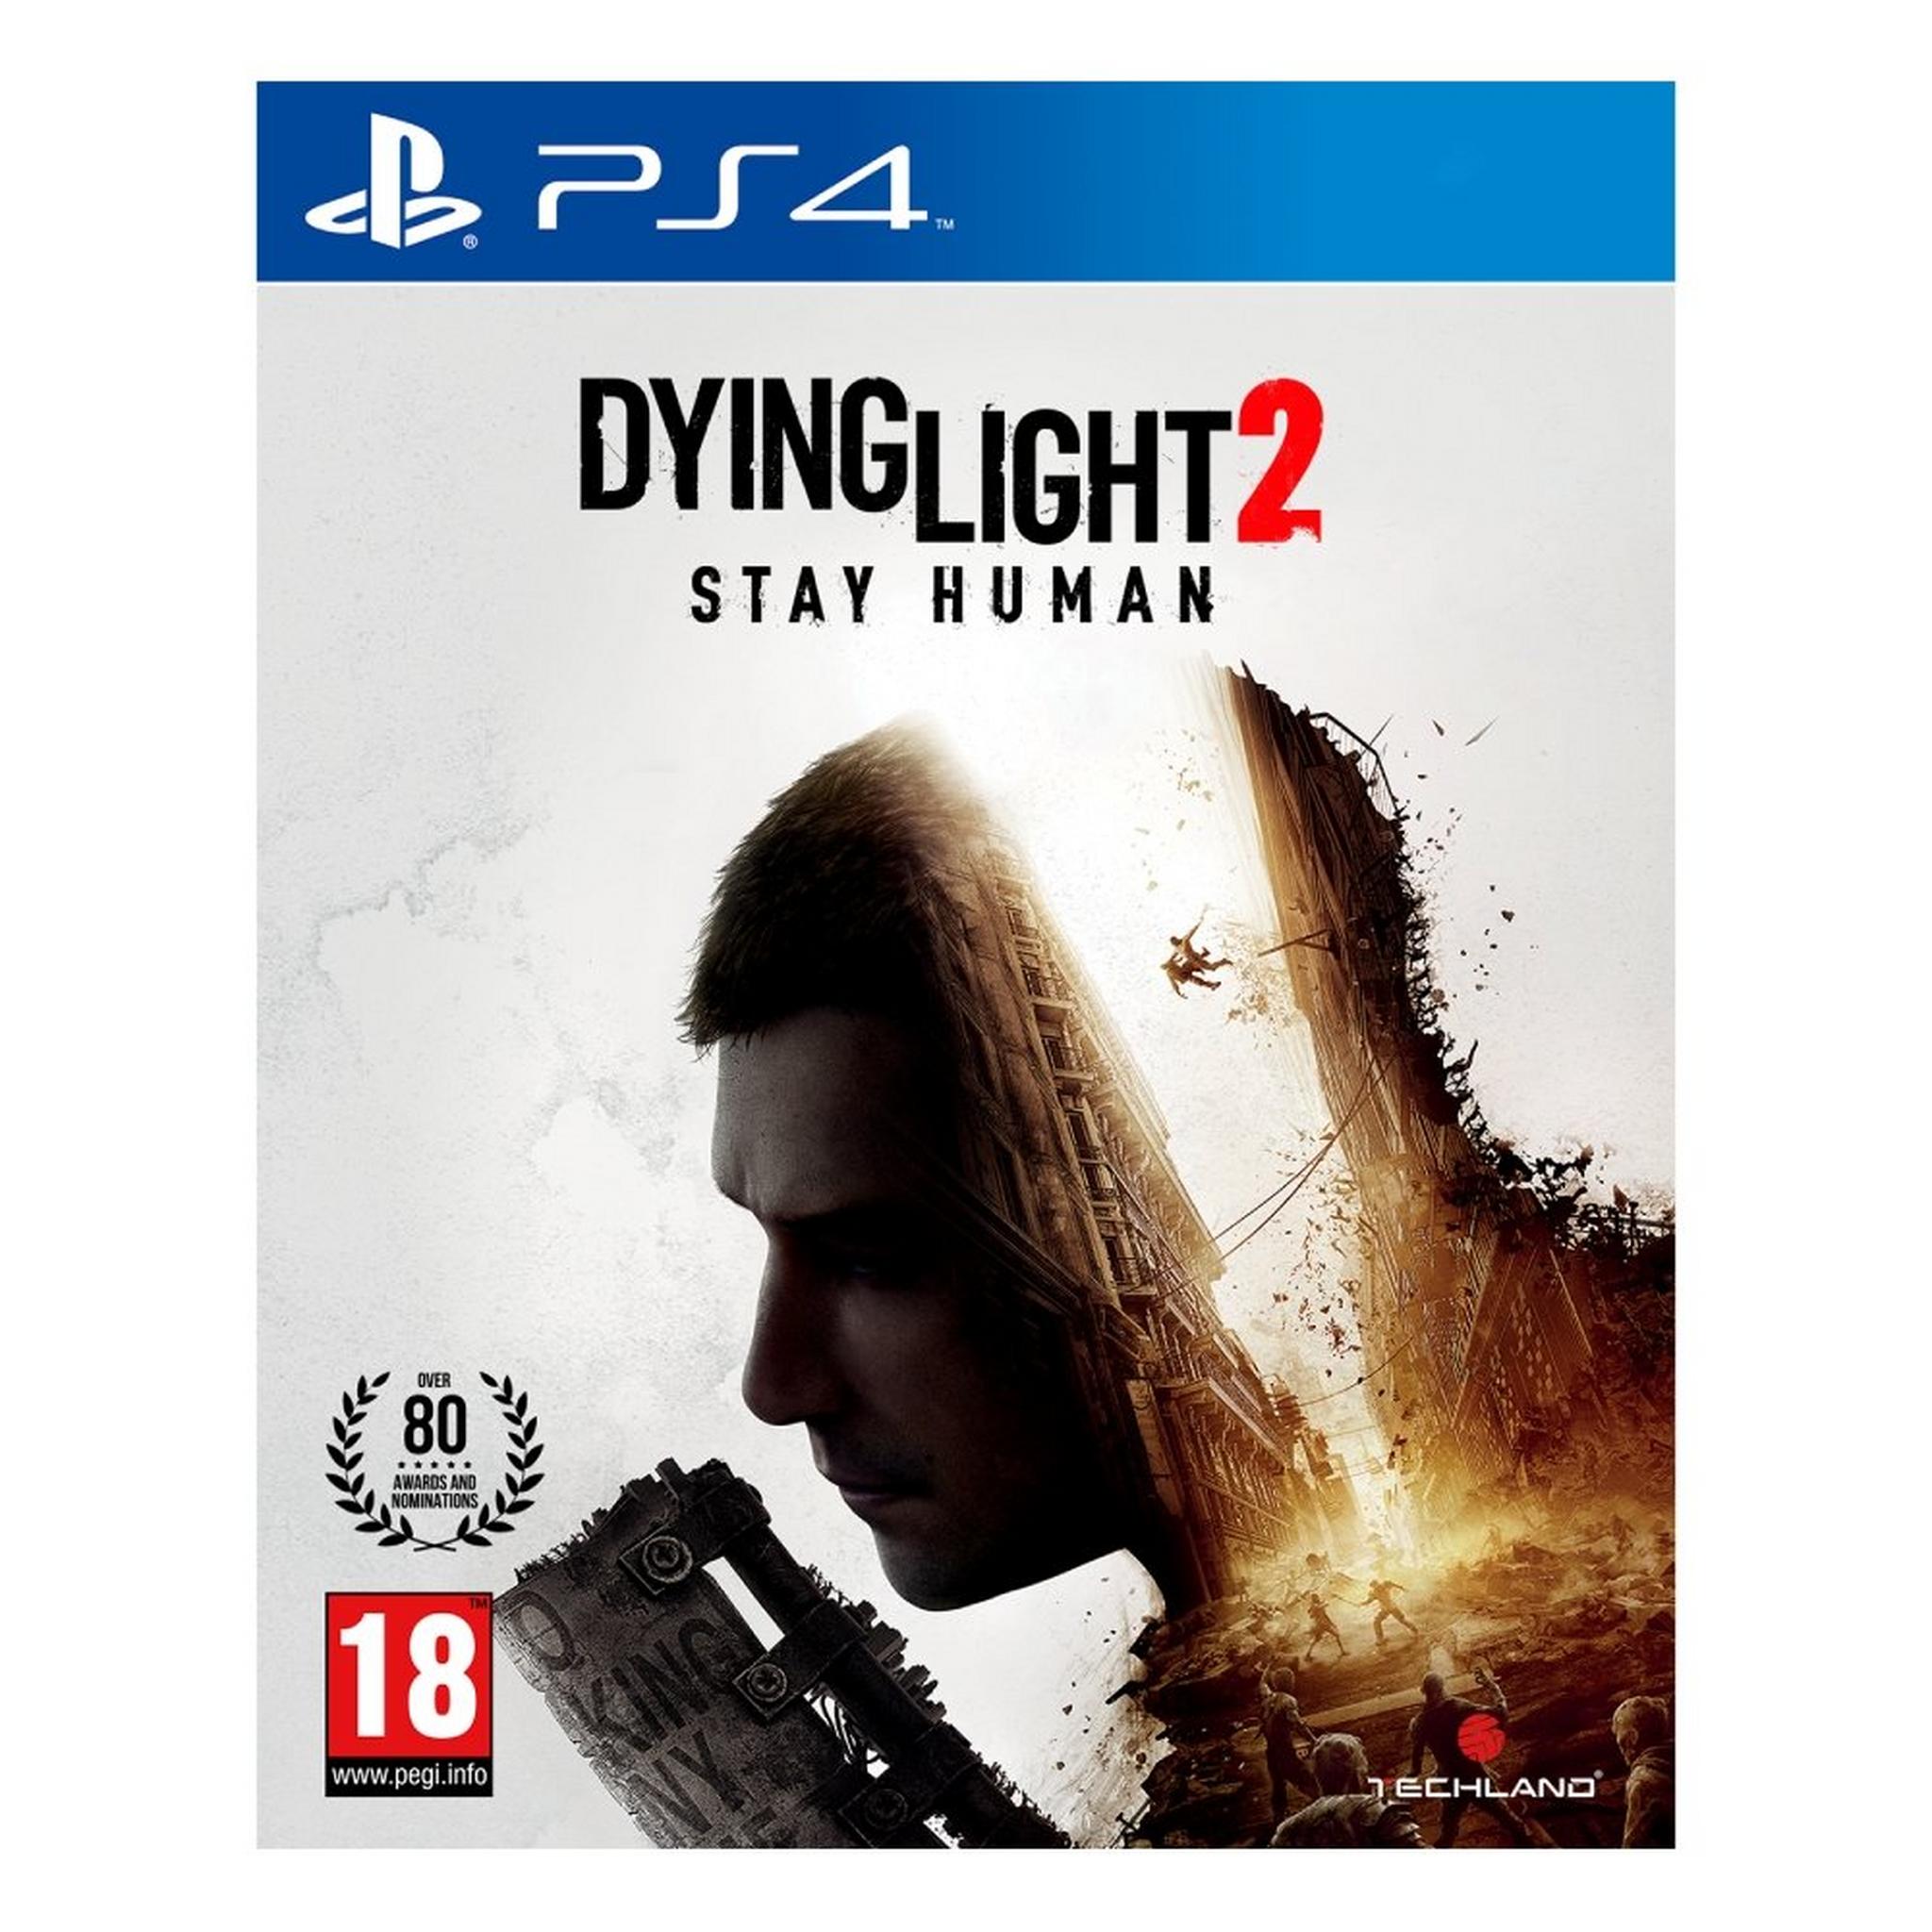 Dying Light 2 Stay Human - Standard Edition - PS4 Game